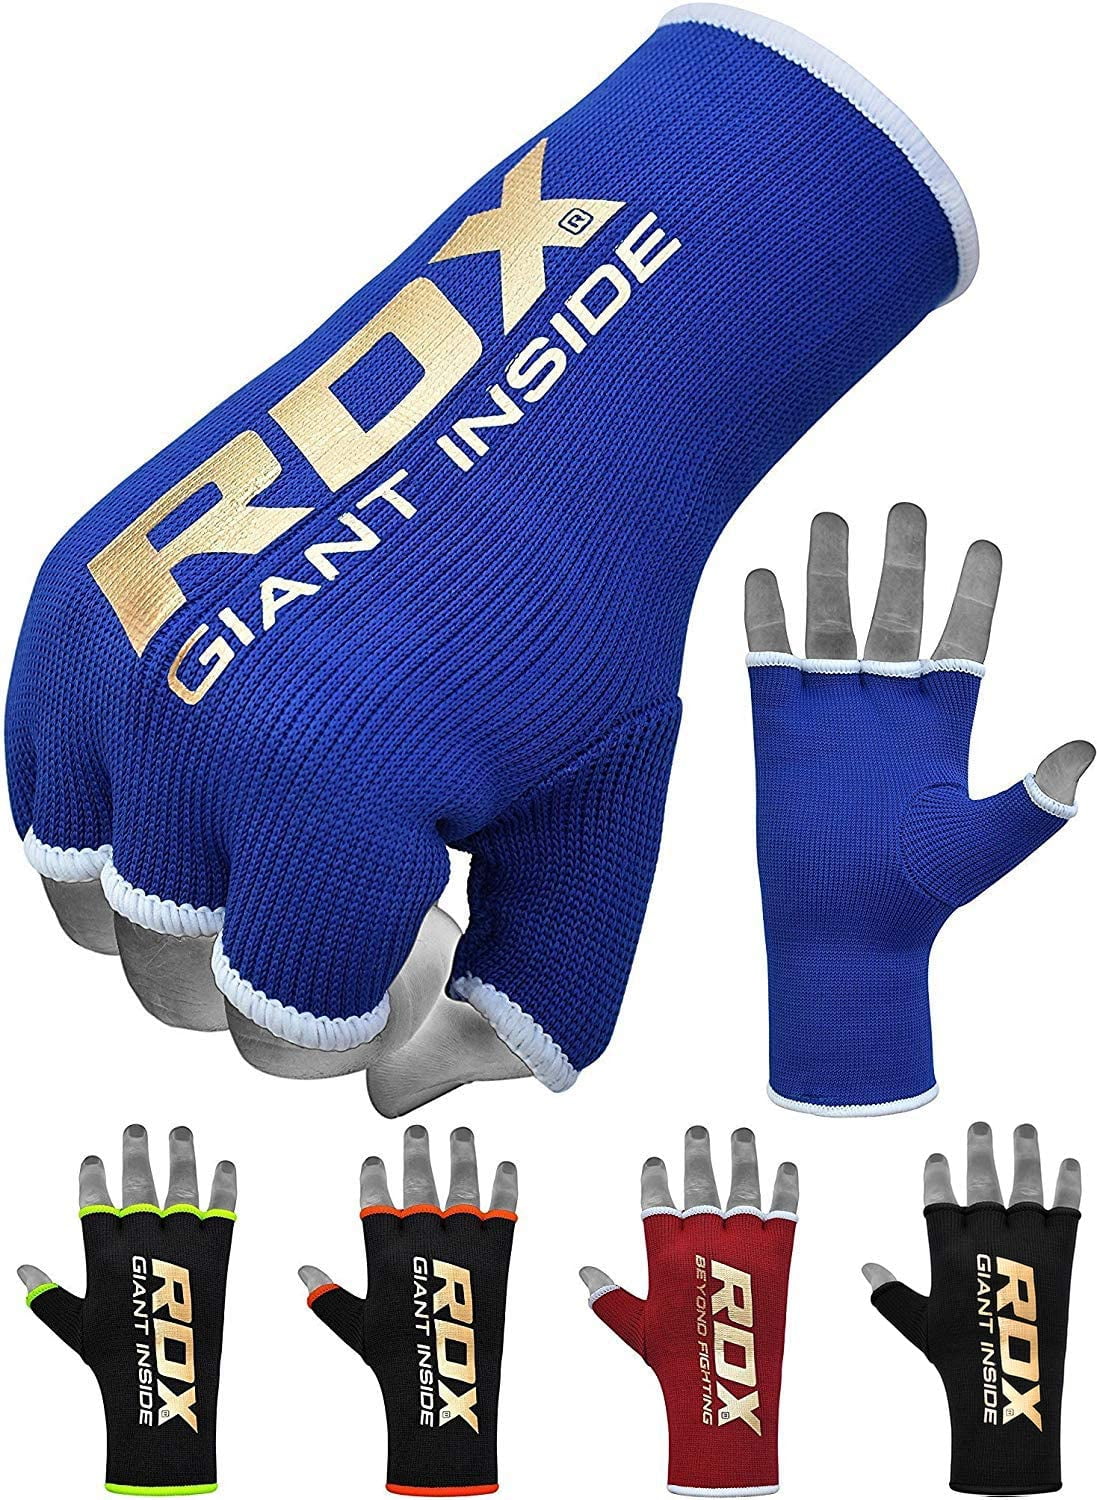 RDX Inner Gloves MMA Boxing Hand Wrap Fist Gel Bandages Quick Straps Martial Art 